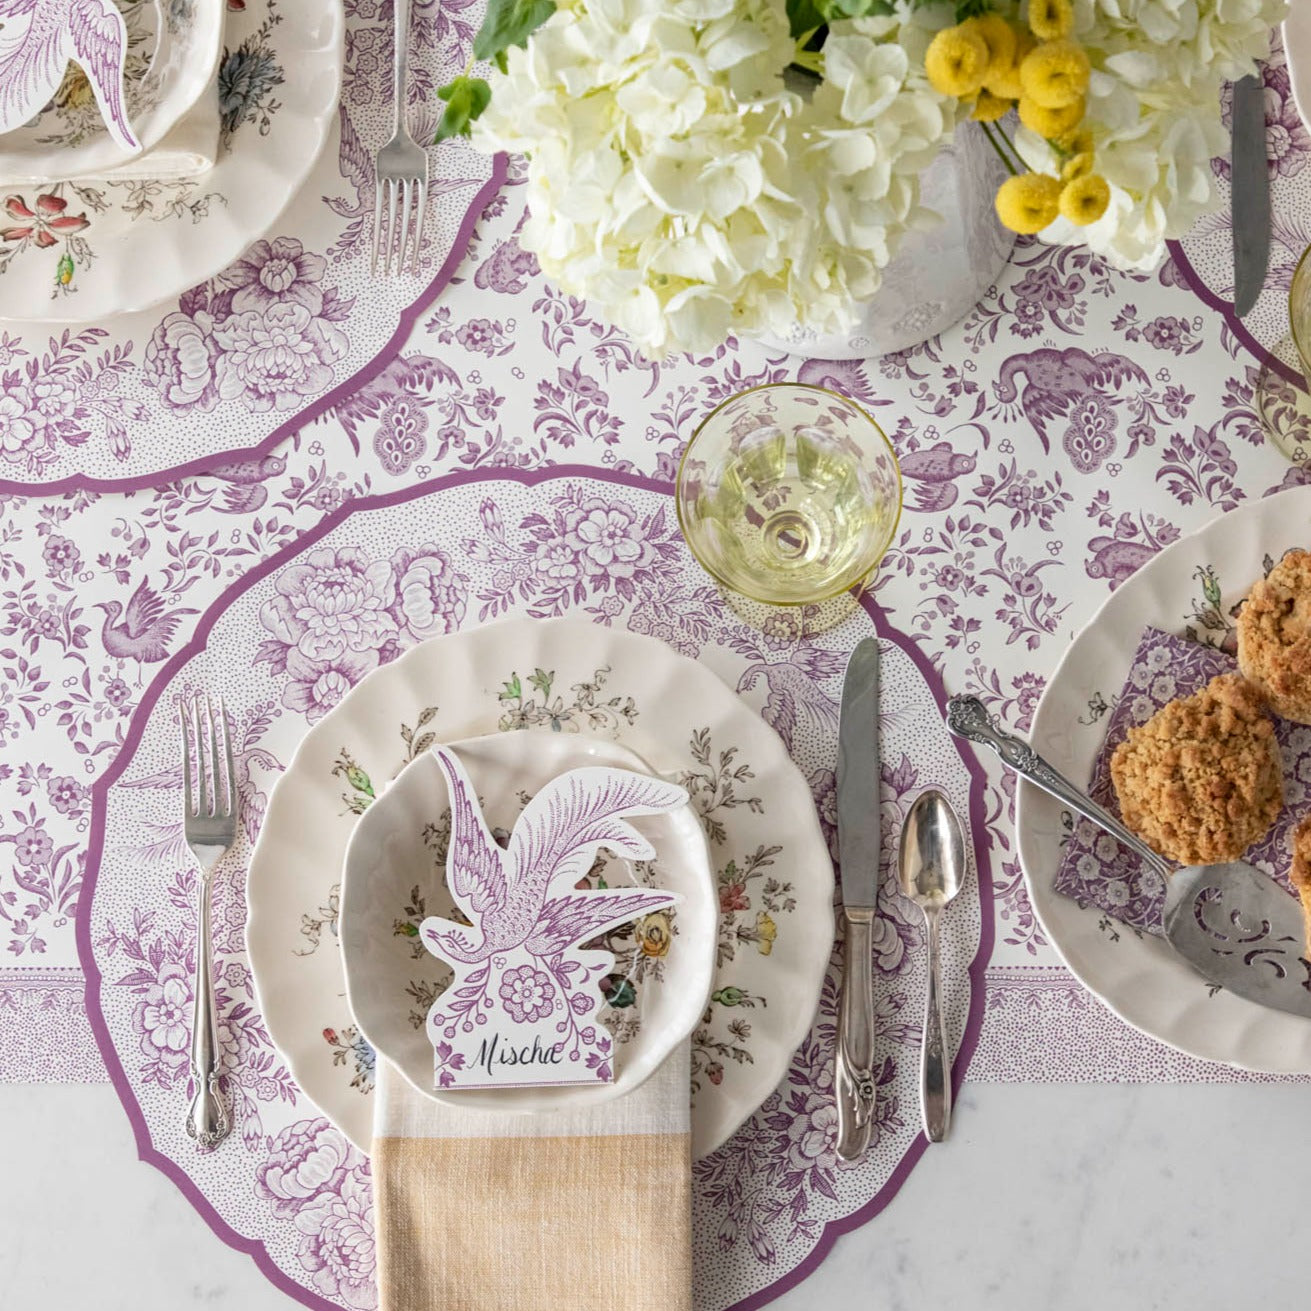 The Die-cut Lilac Asiatic Pheasants Placemat in an elegant table setting, from above.